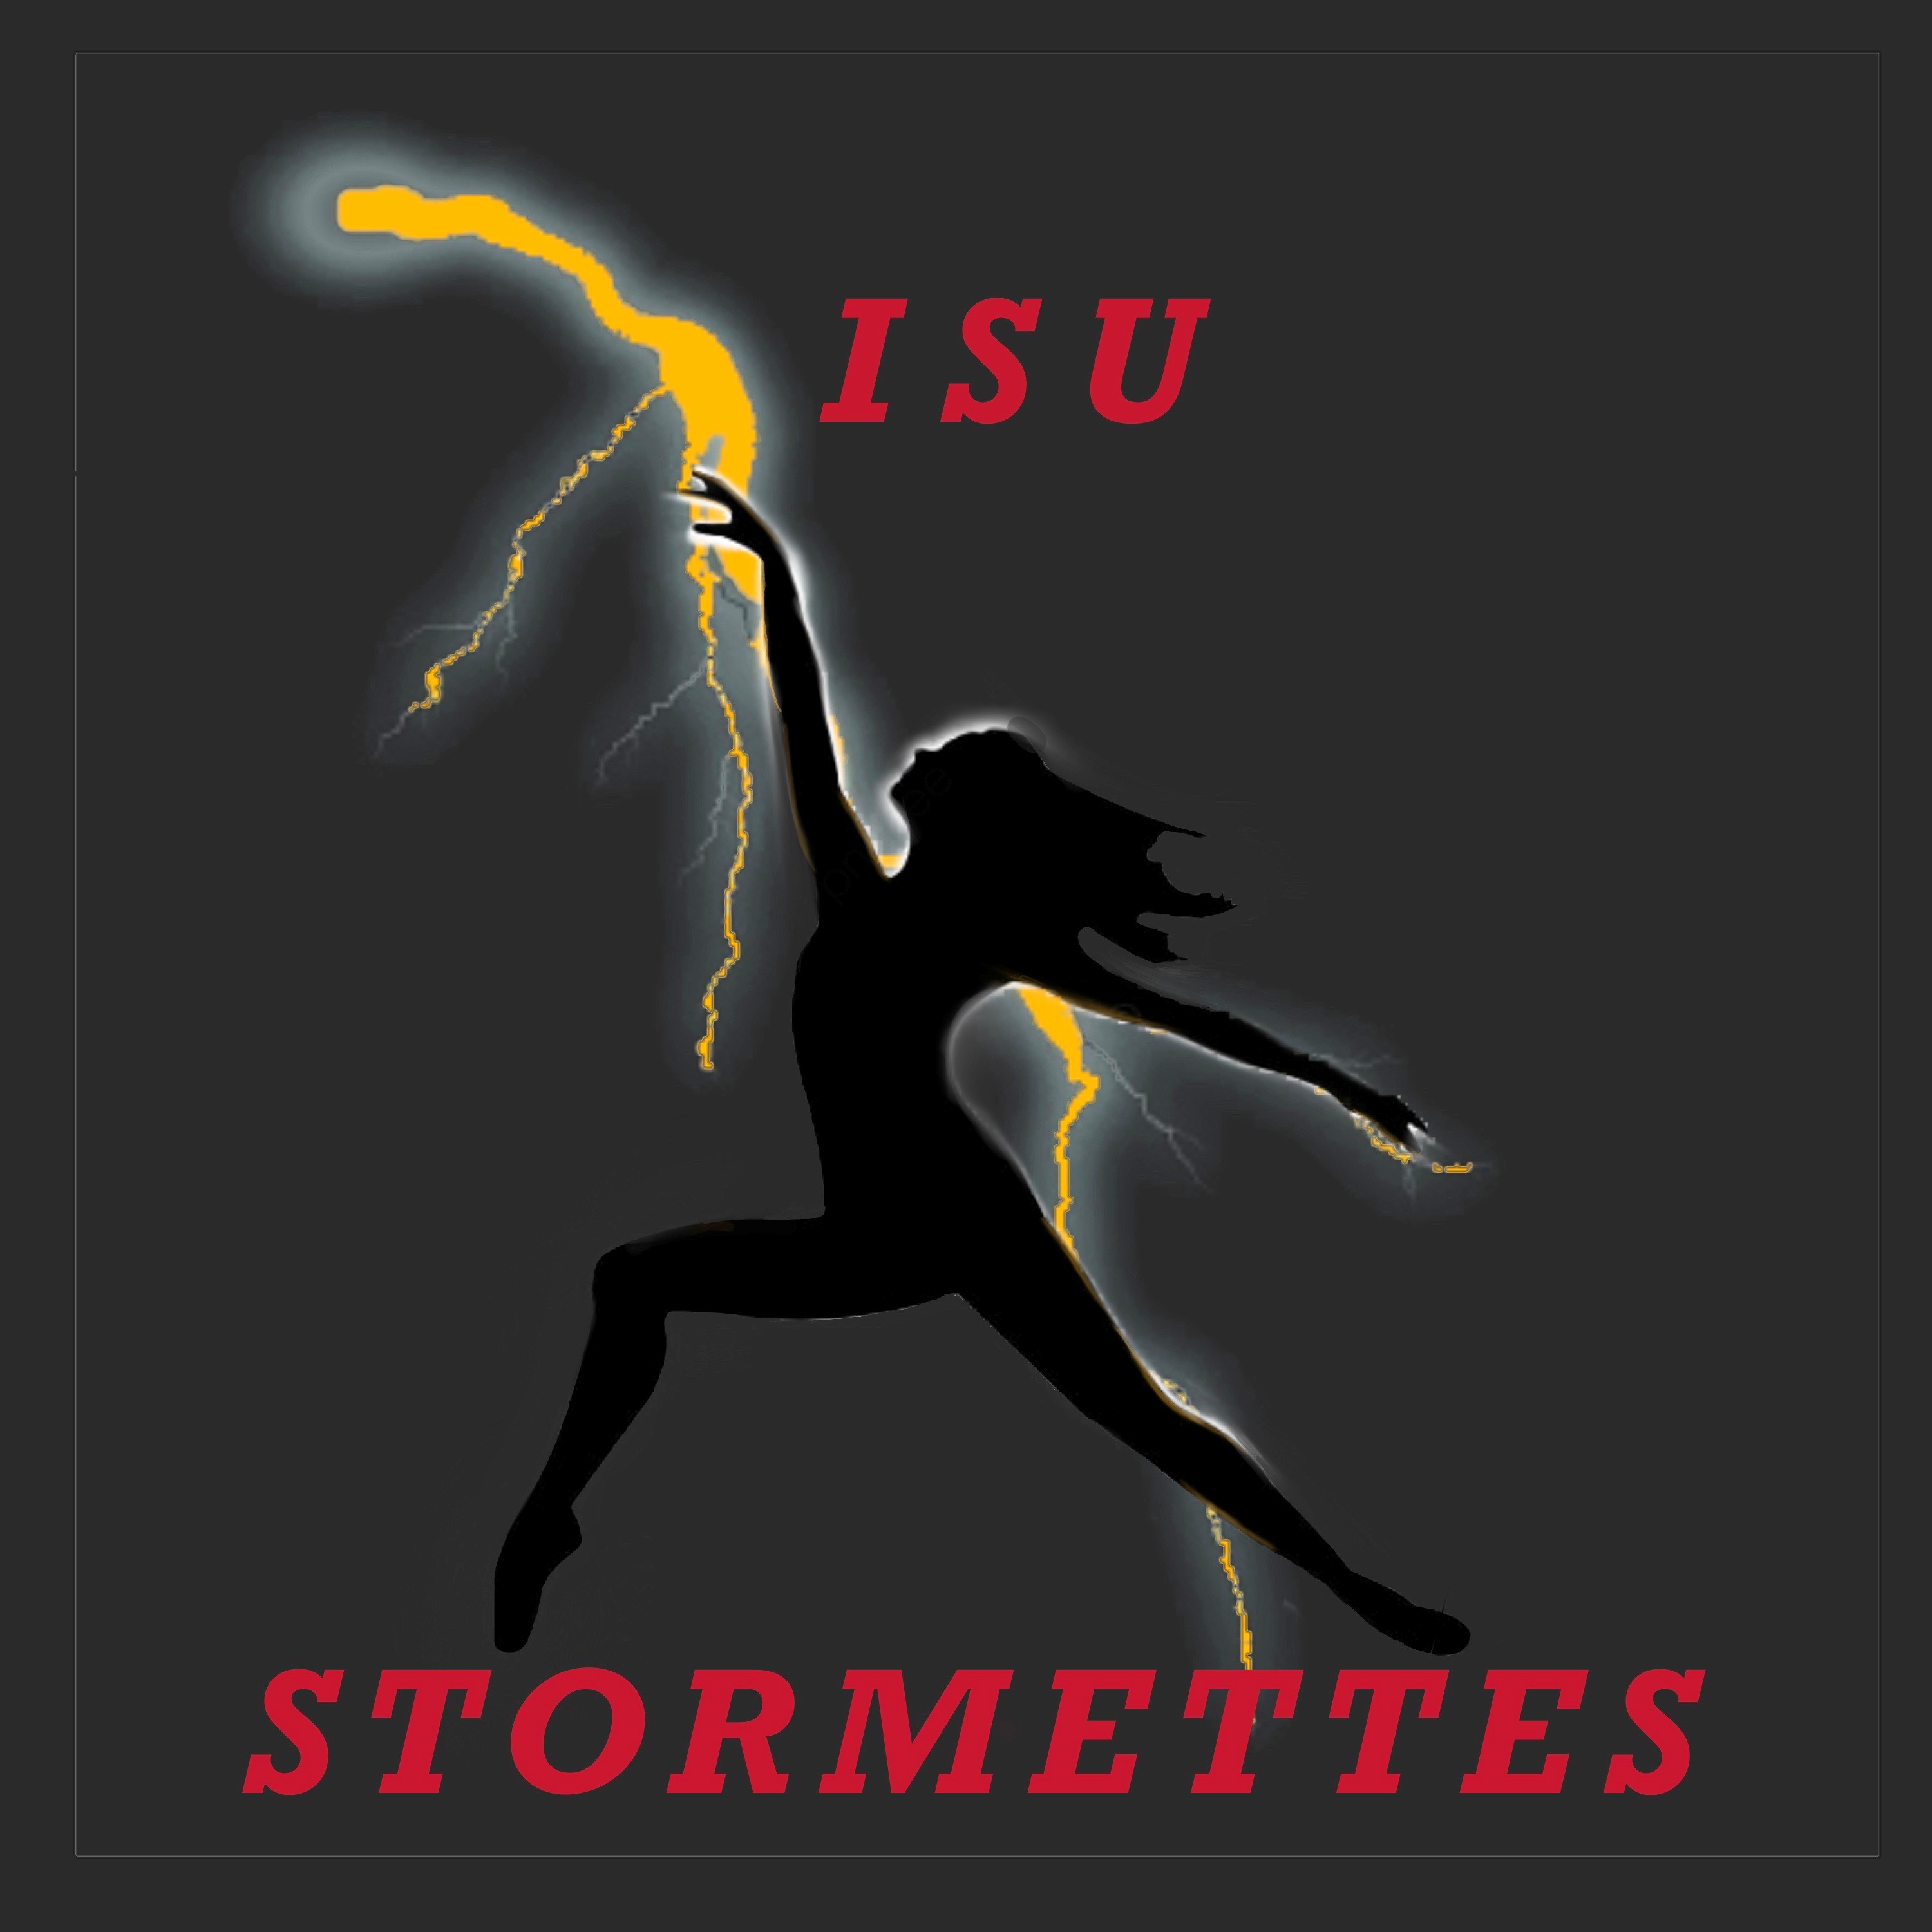 ISU Stormettes logo featuring woman dancing in front of lightning